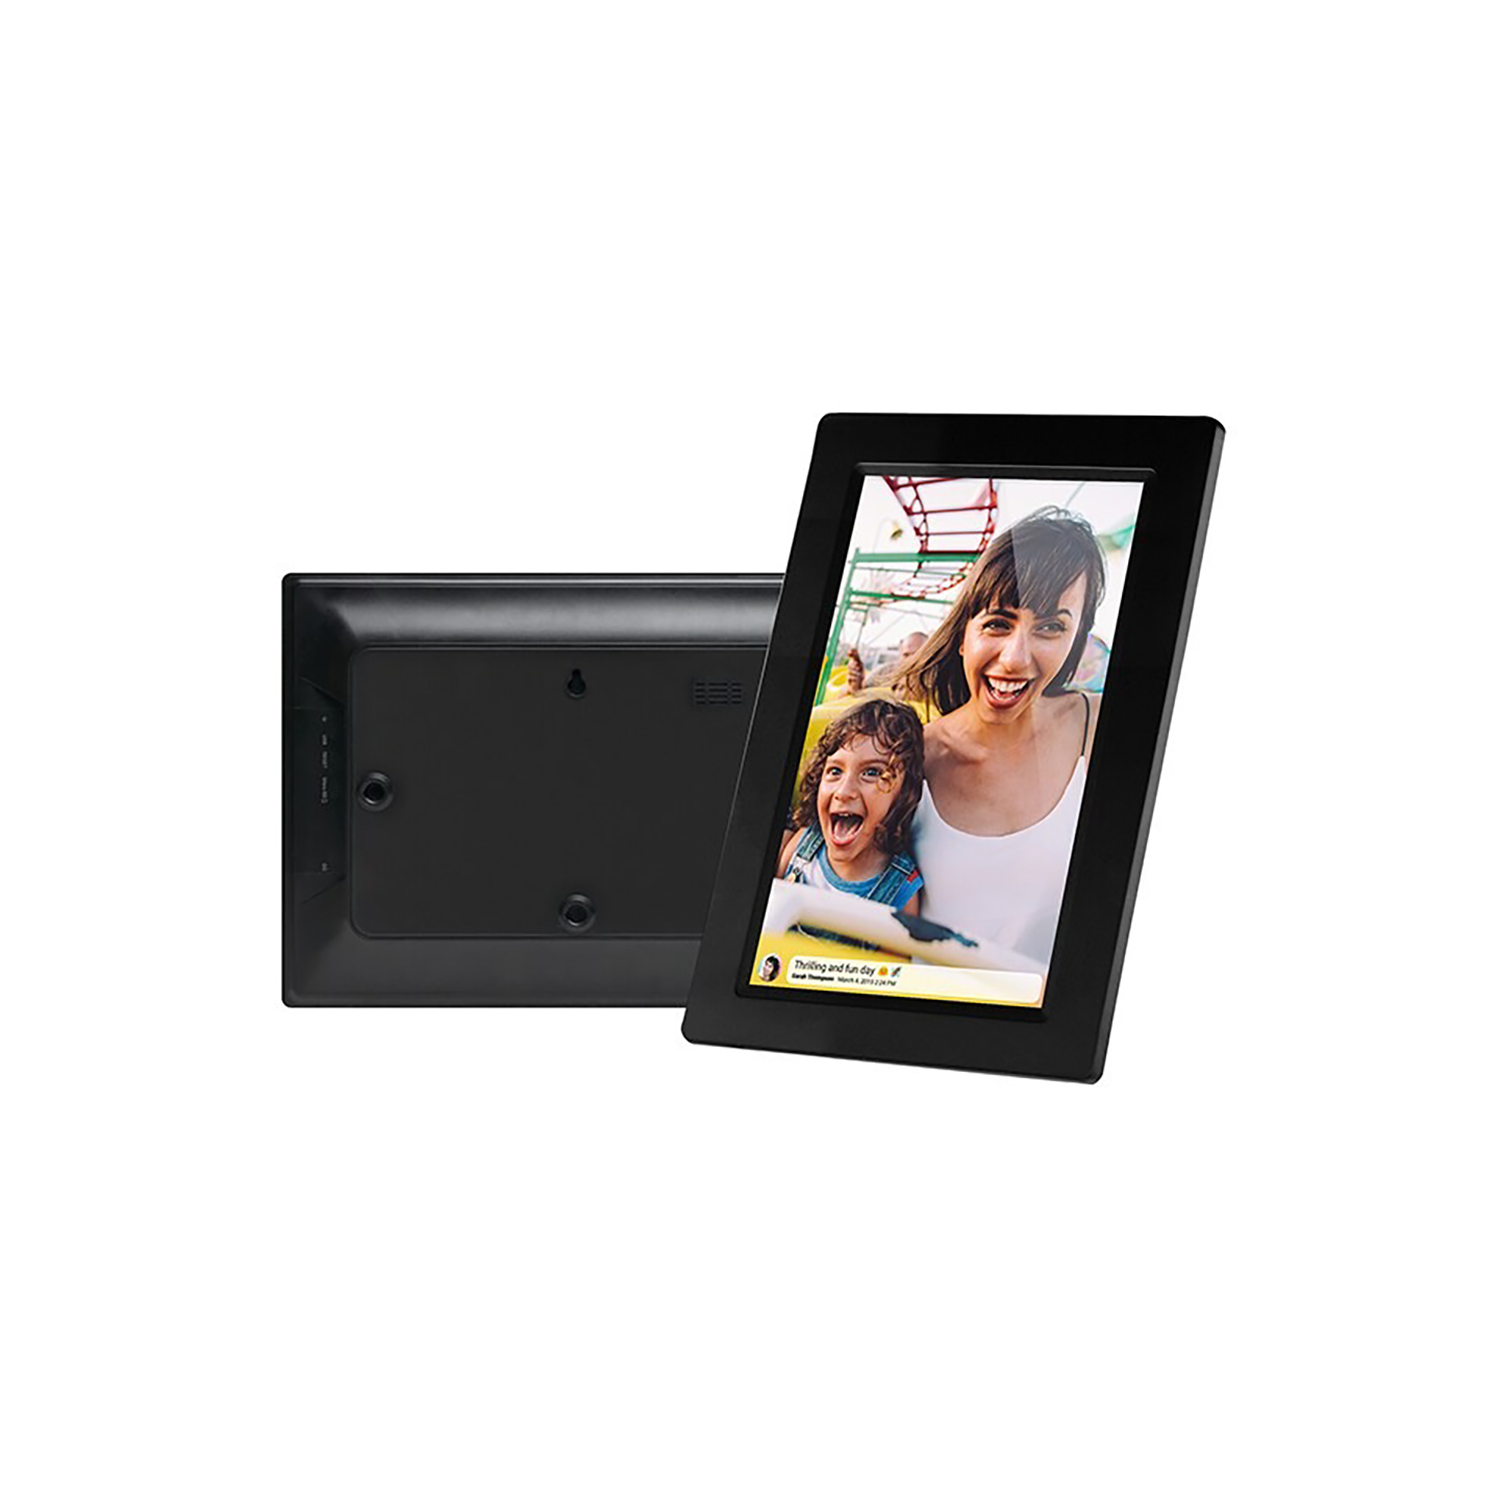 Sylvania 10" LED Touch Screen Digital Picture Frame with Wi-Fi and Cloud